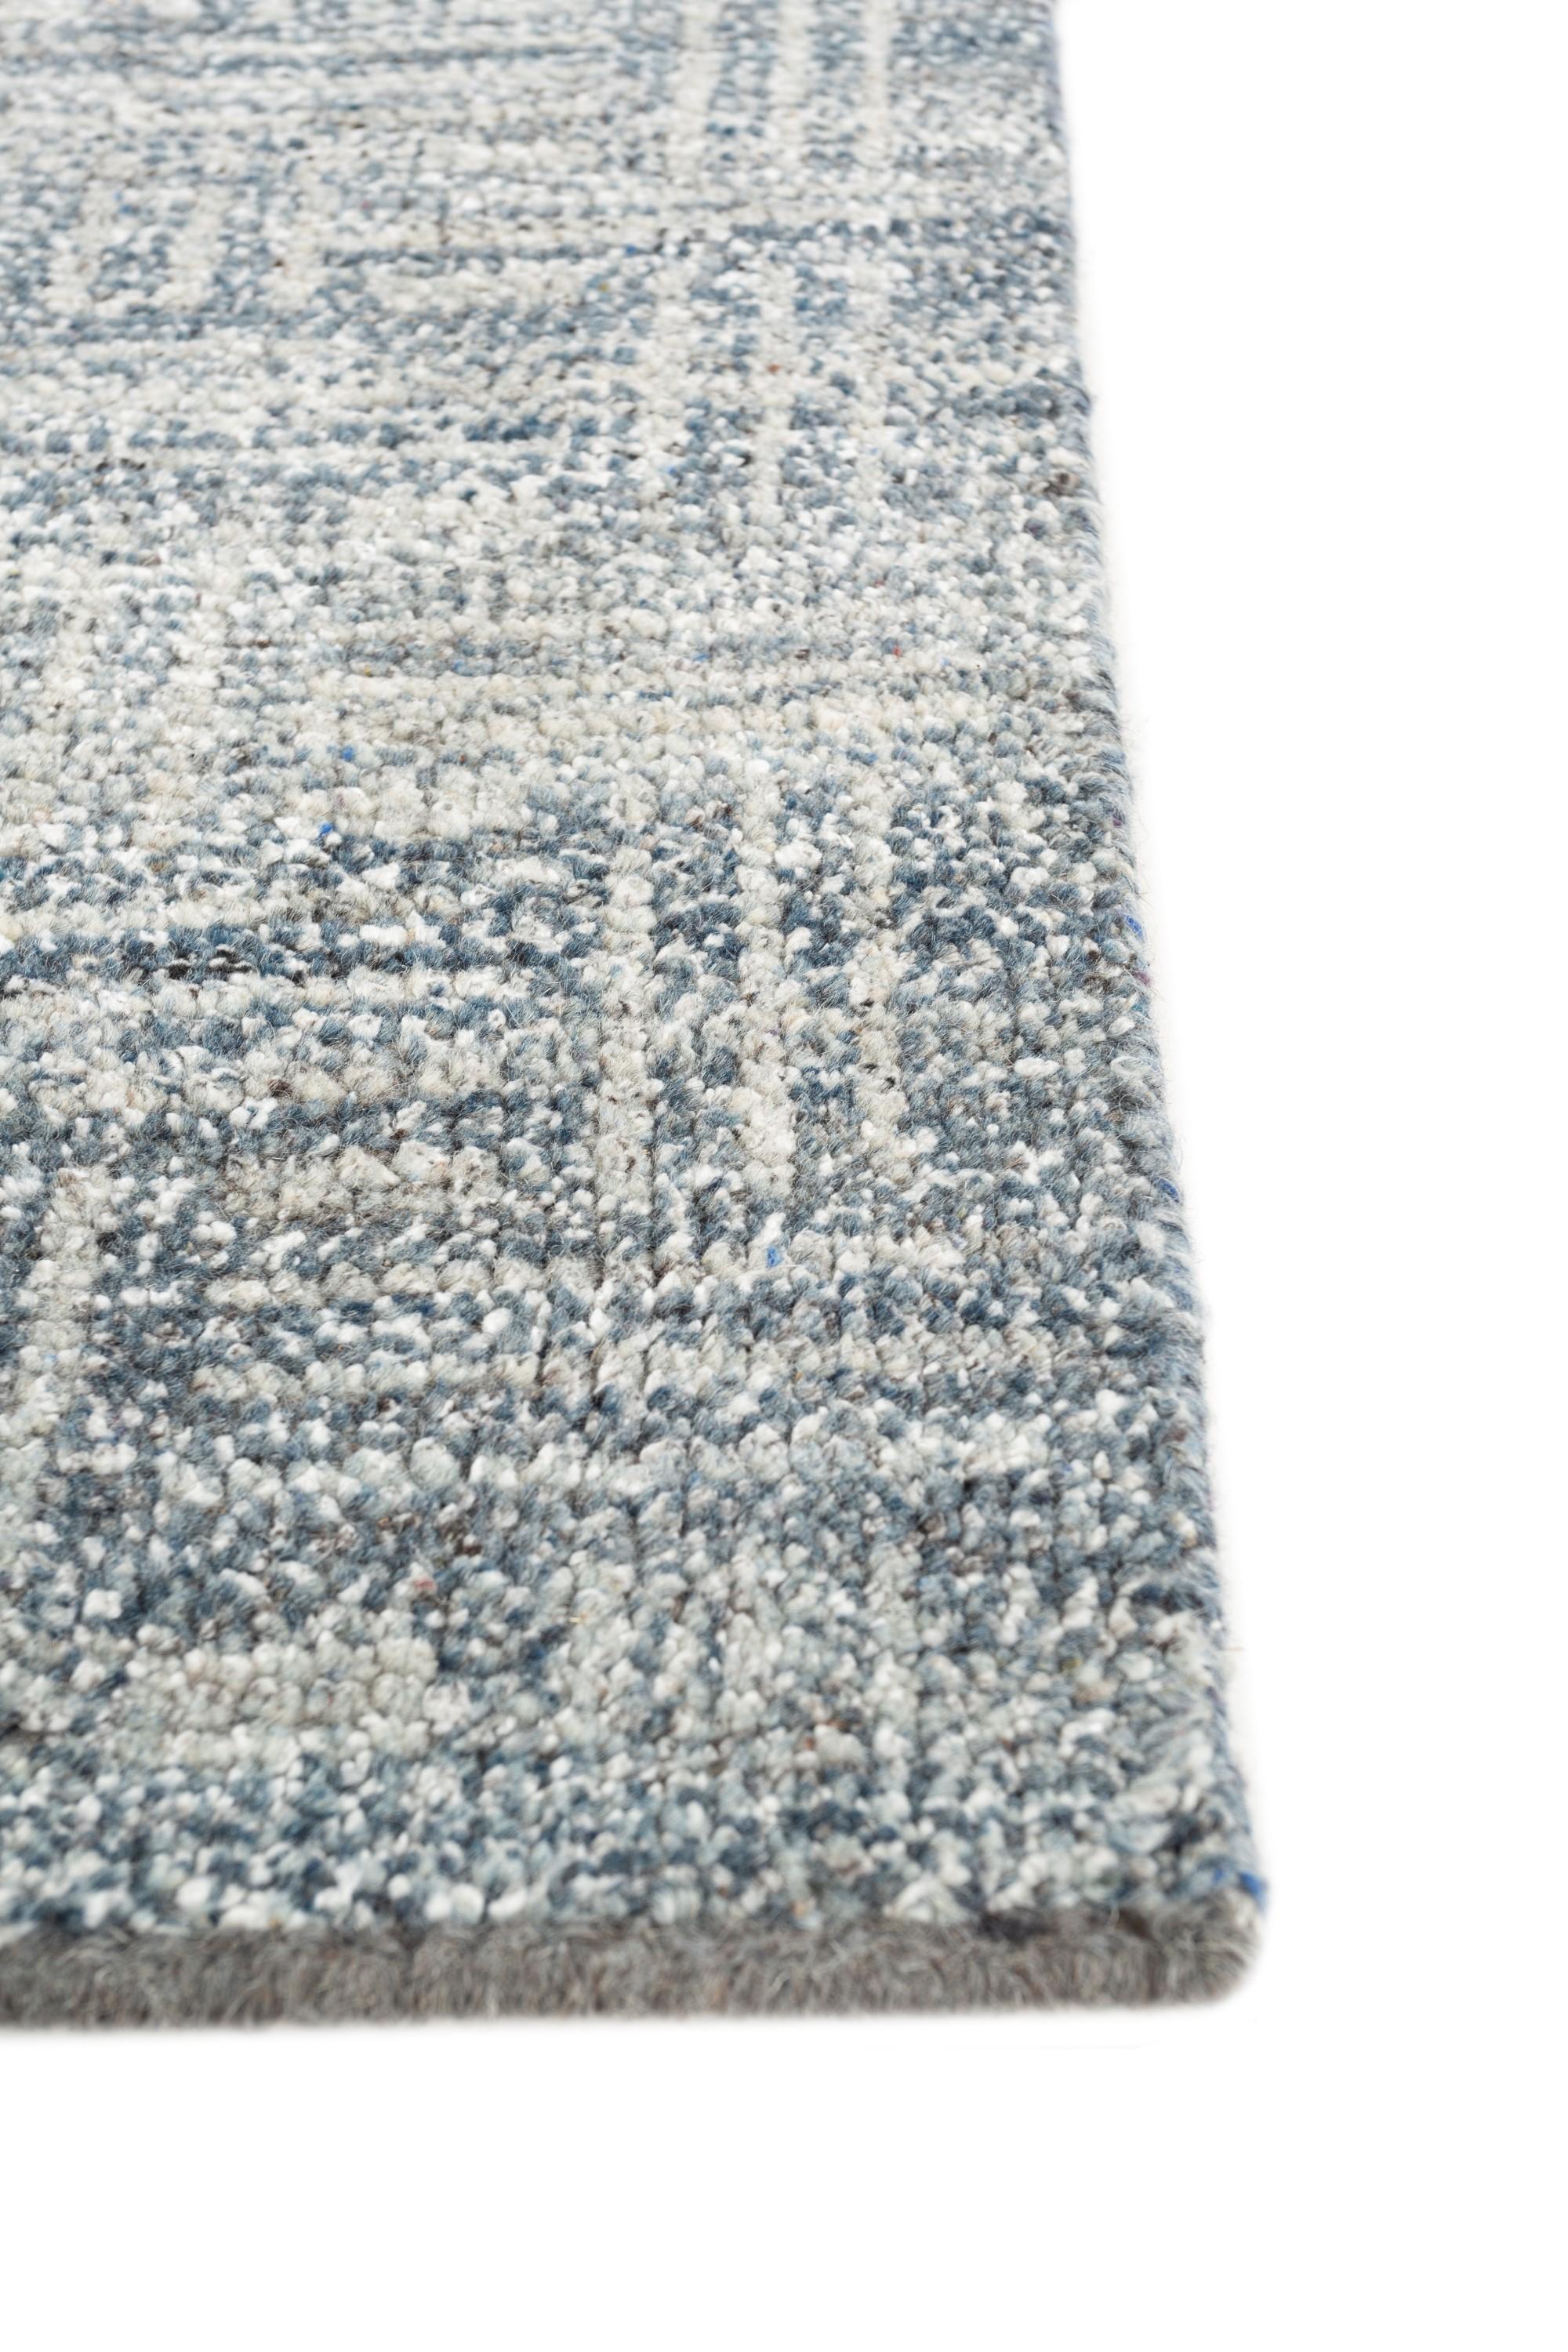 Imagine the soft caress of ocean waves translated into an enchanting rug that adorns your living space. Presenting this stunning rug from our manifest collection which reflects such a vibe. With its gentle hues of light blue, this rug invites you to